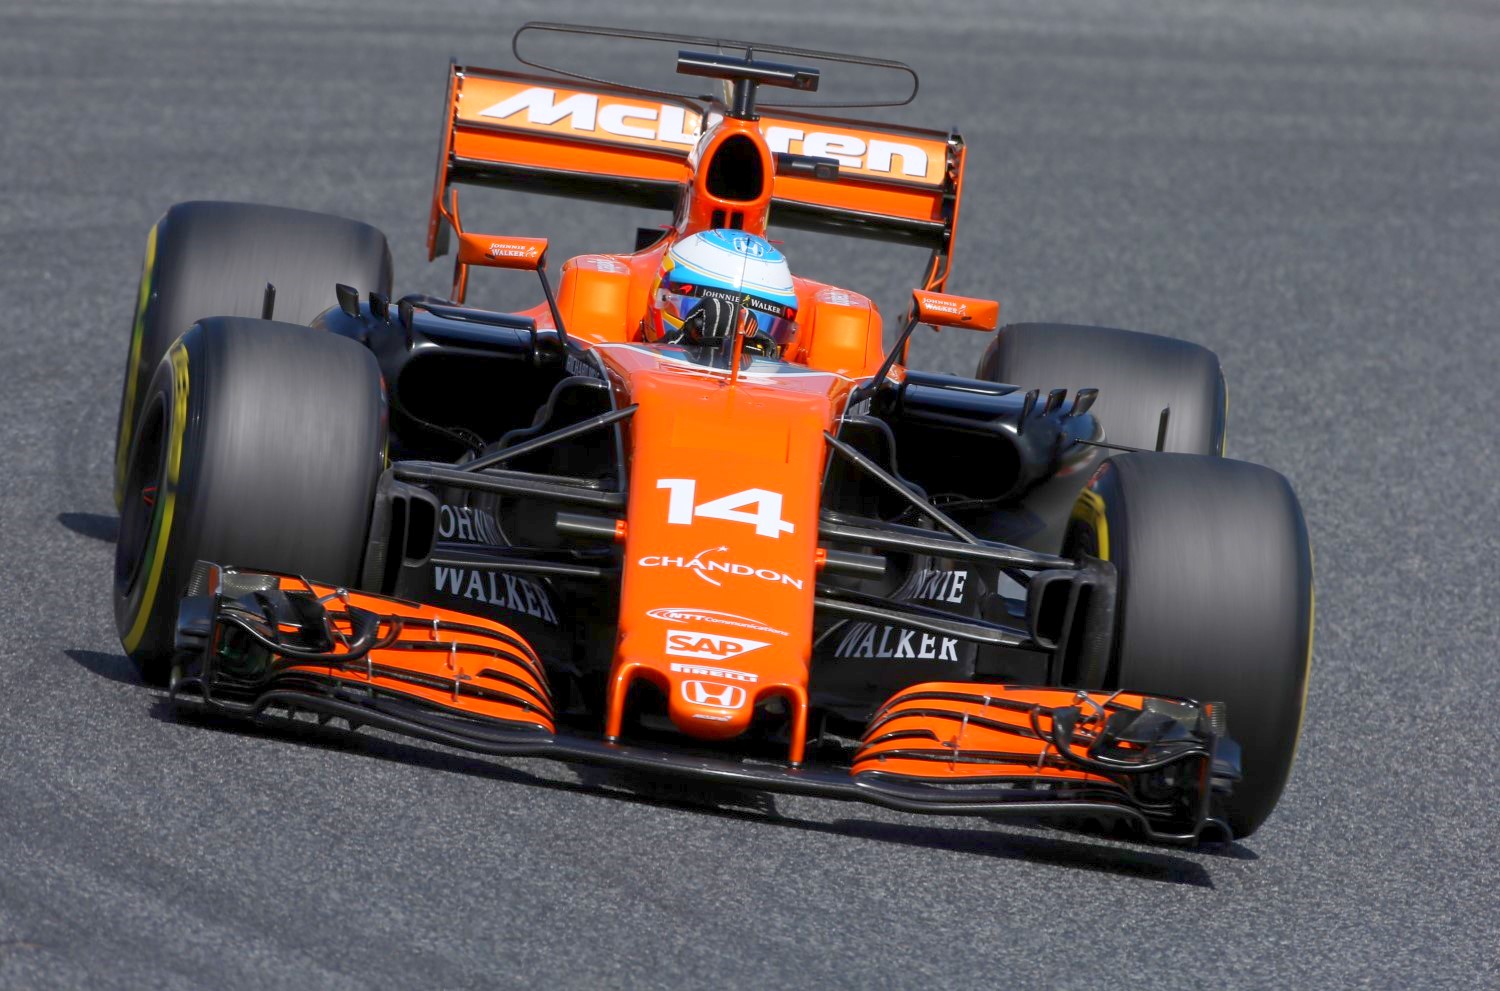 Alonso hopes his Honda will take him to the finish in Canada